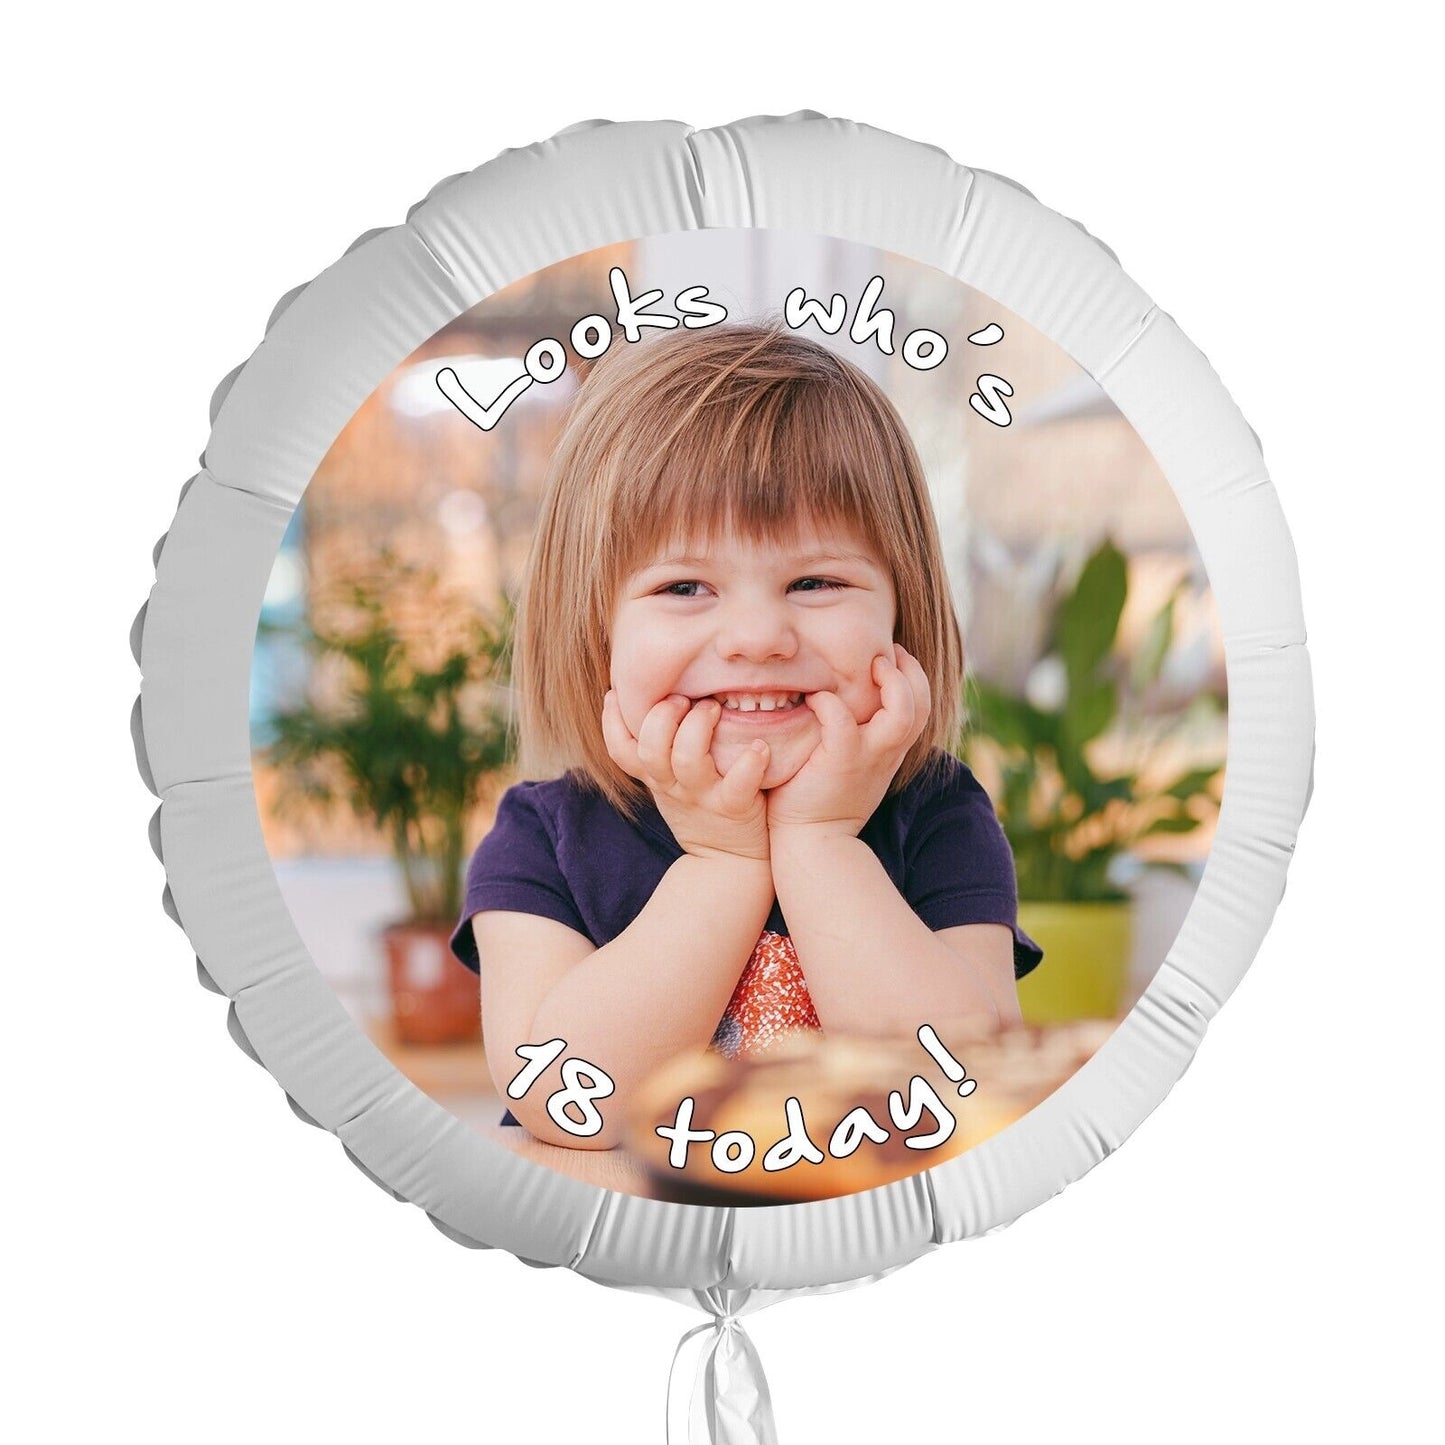 Personalised Photo Balloon for Birthday Wedding Engagement Christmas and More